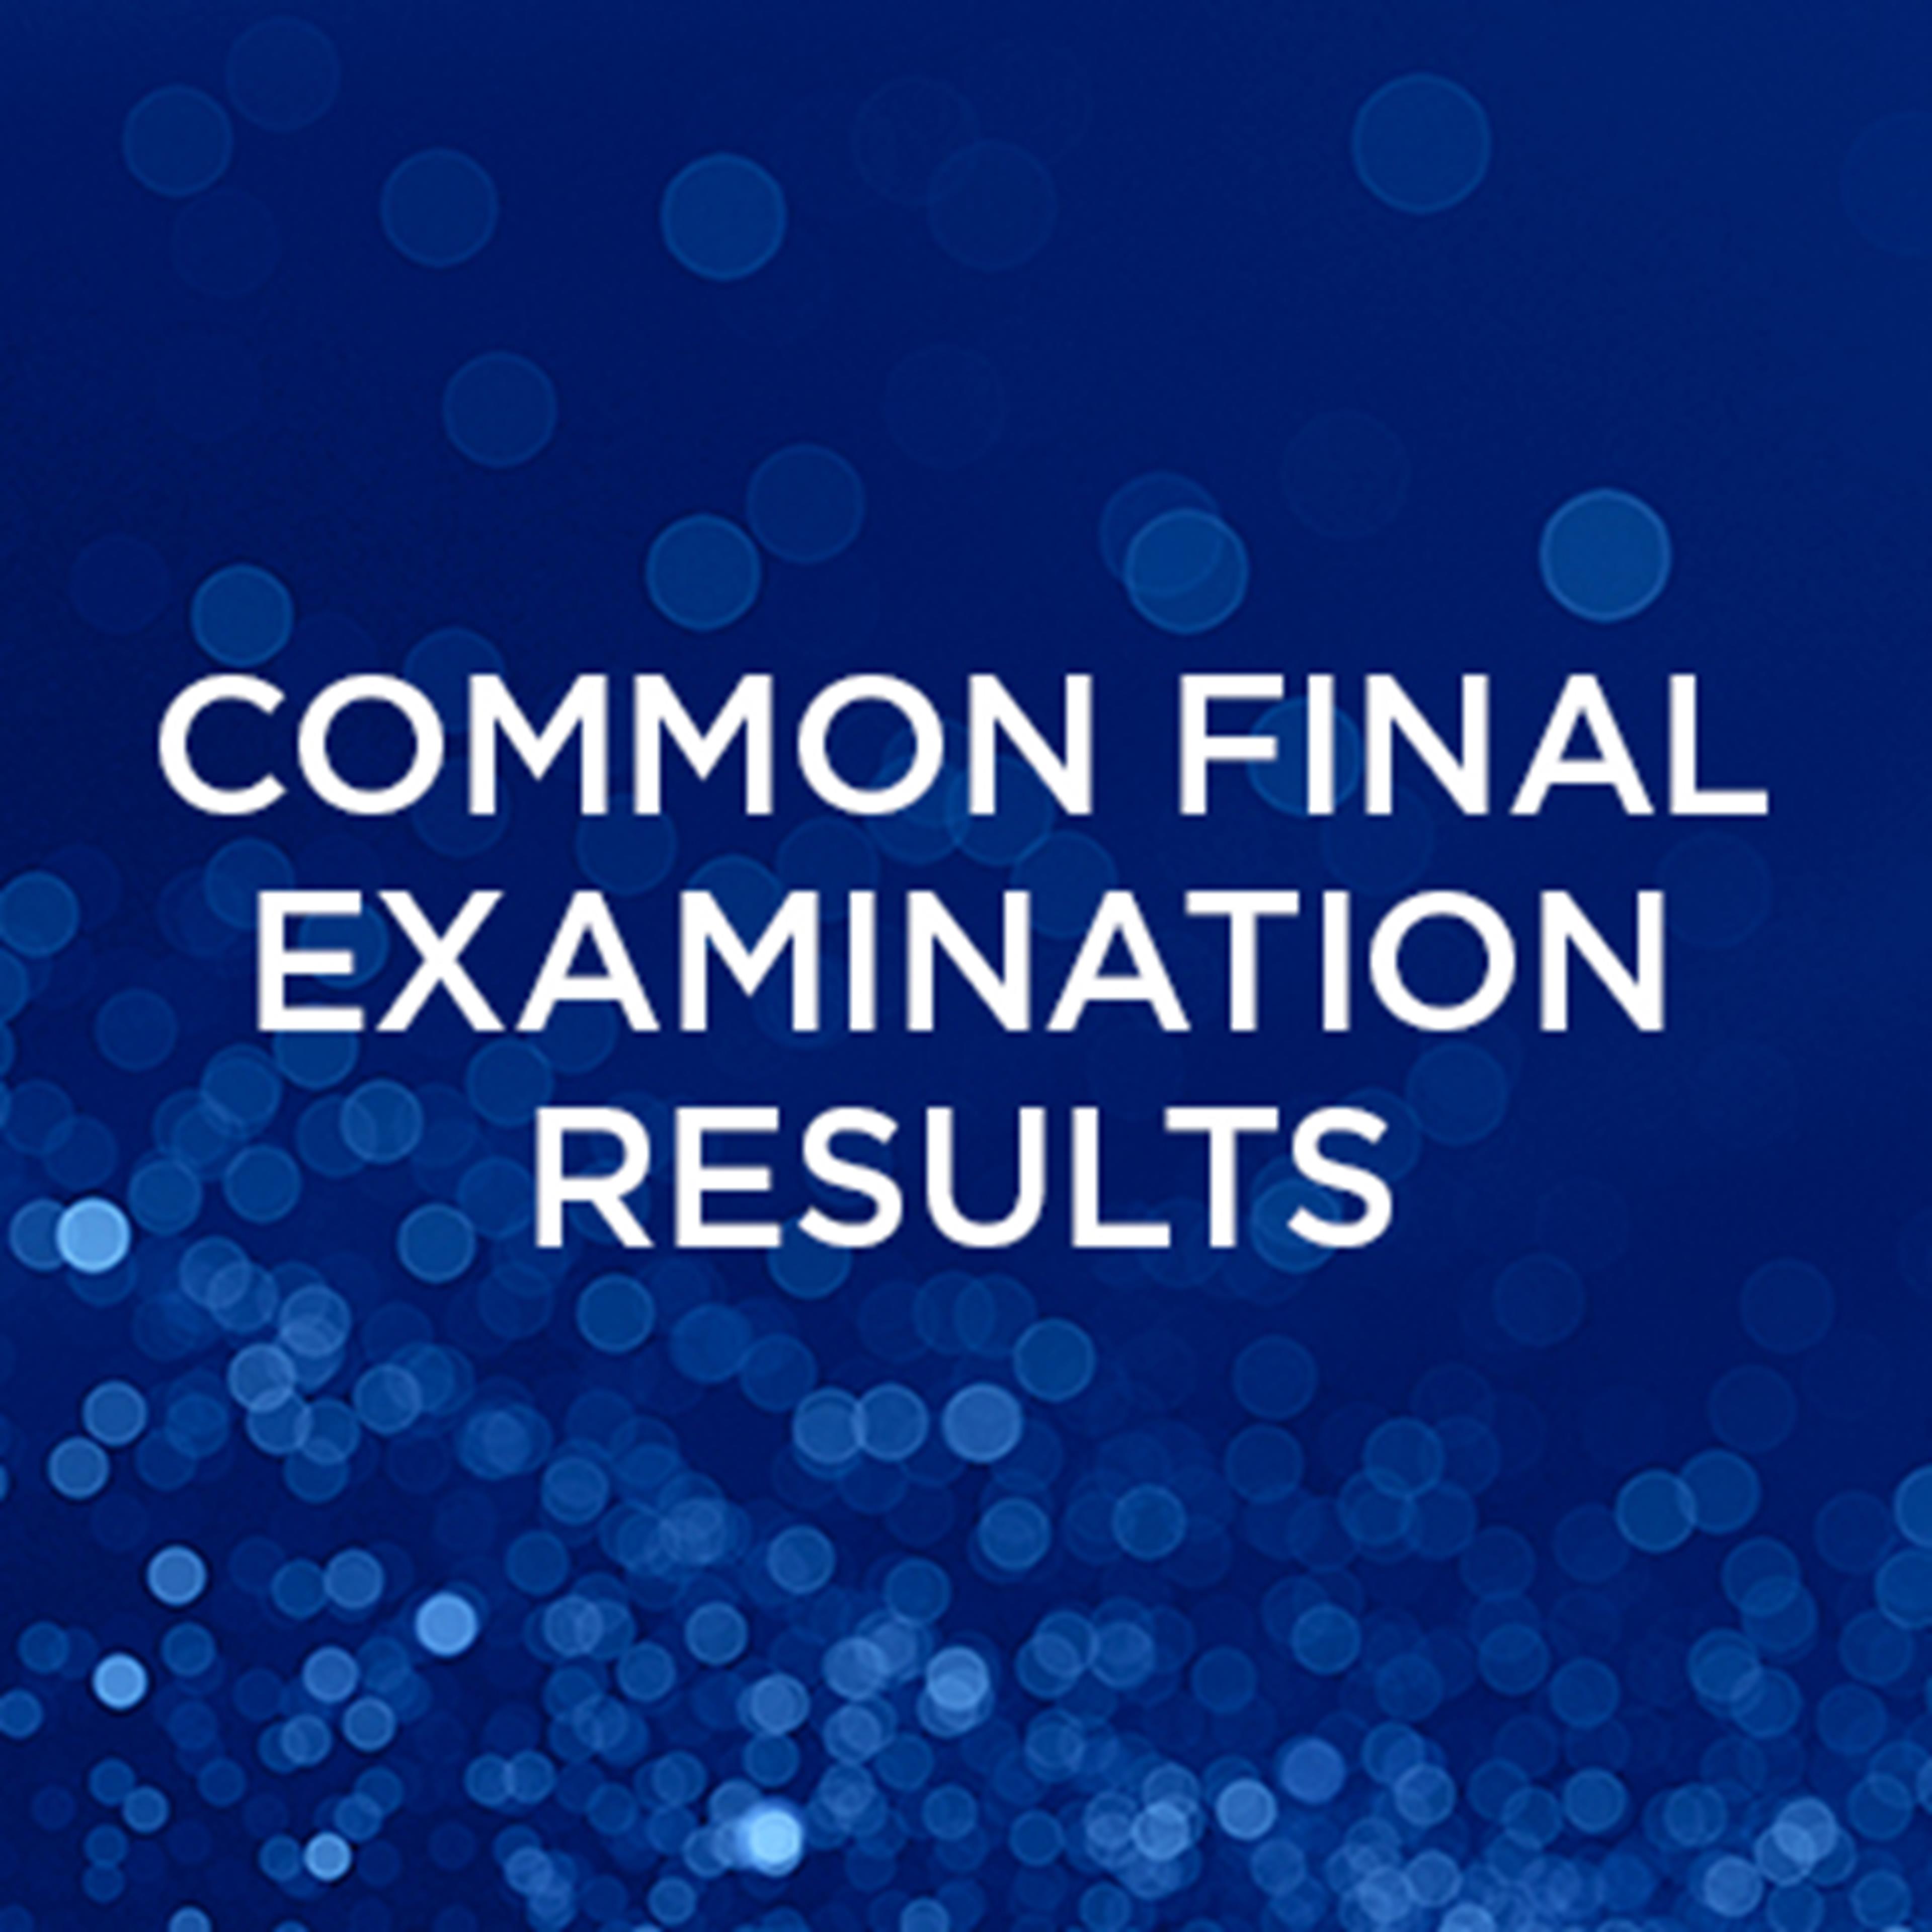 Common final examination results